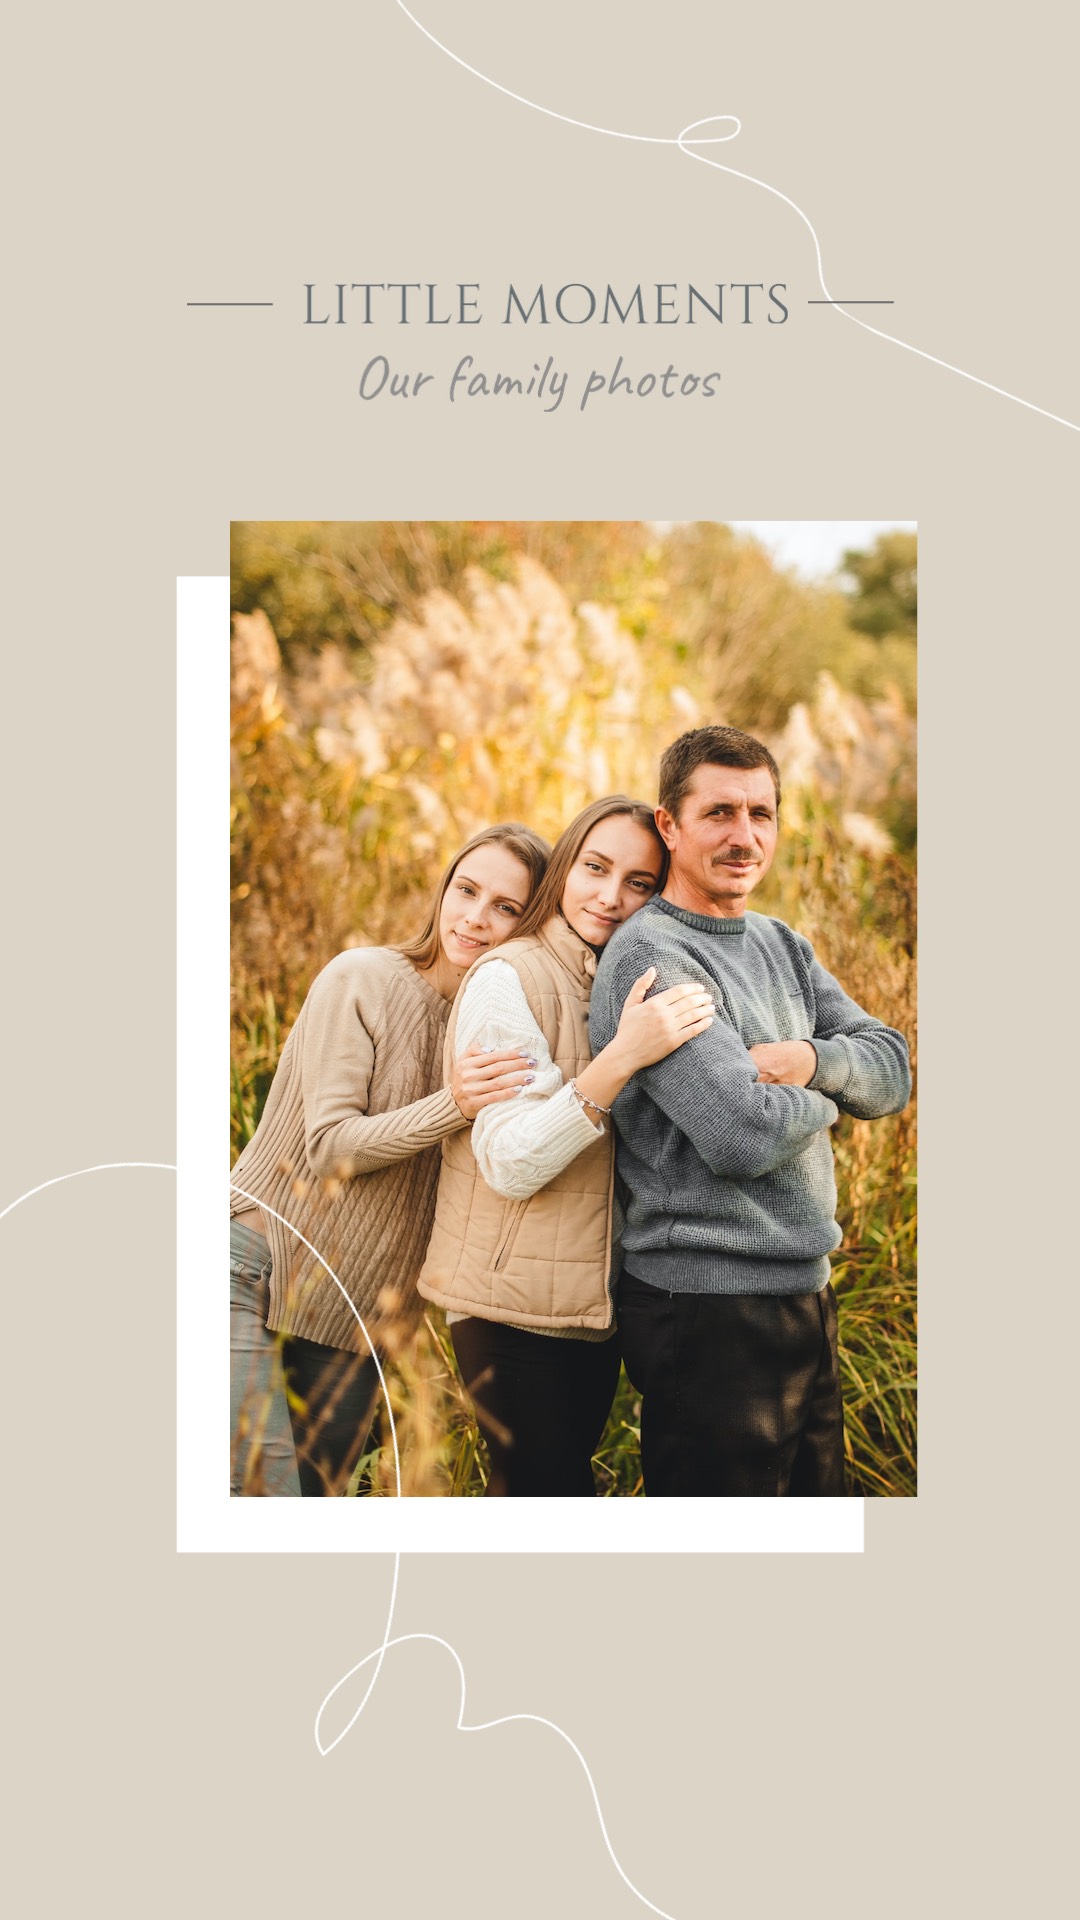 Little moments through our family photos family template